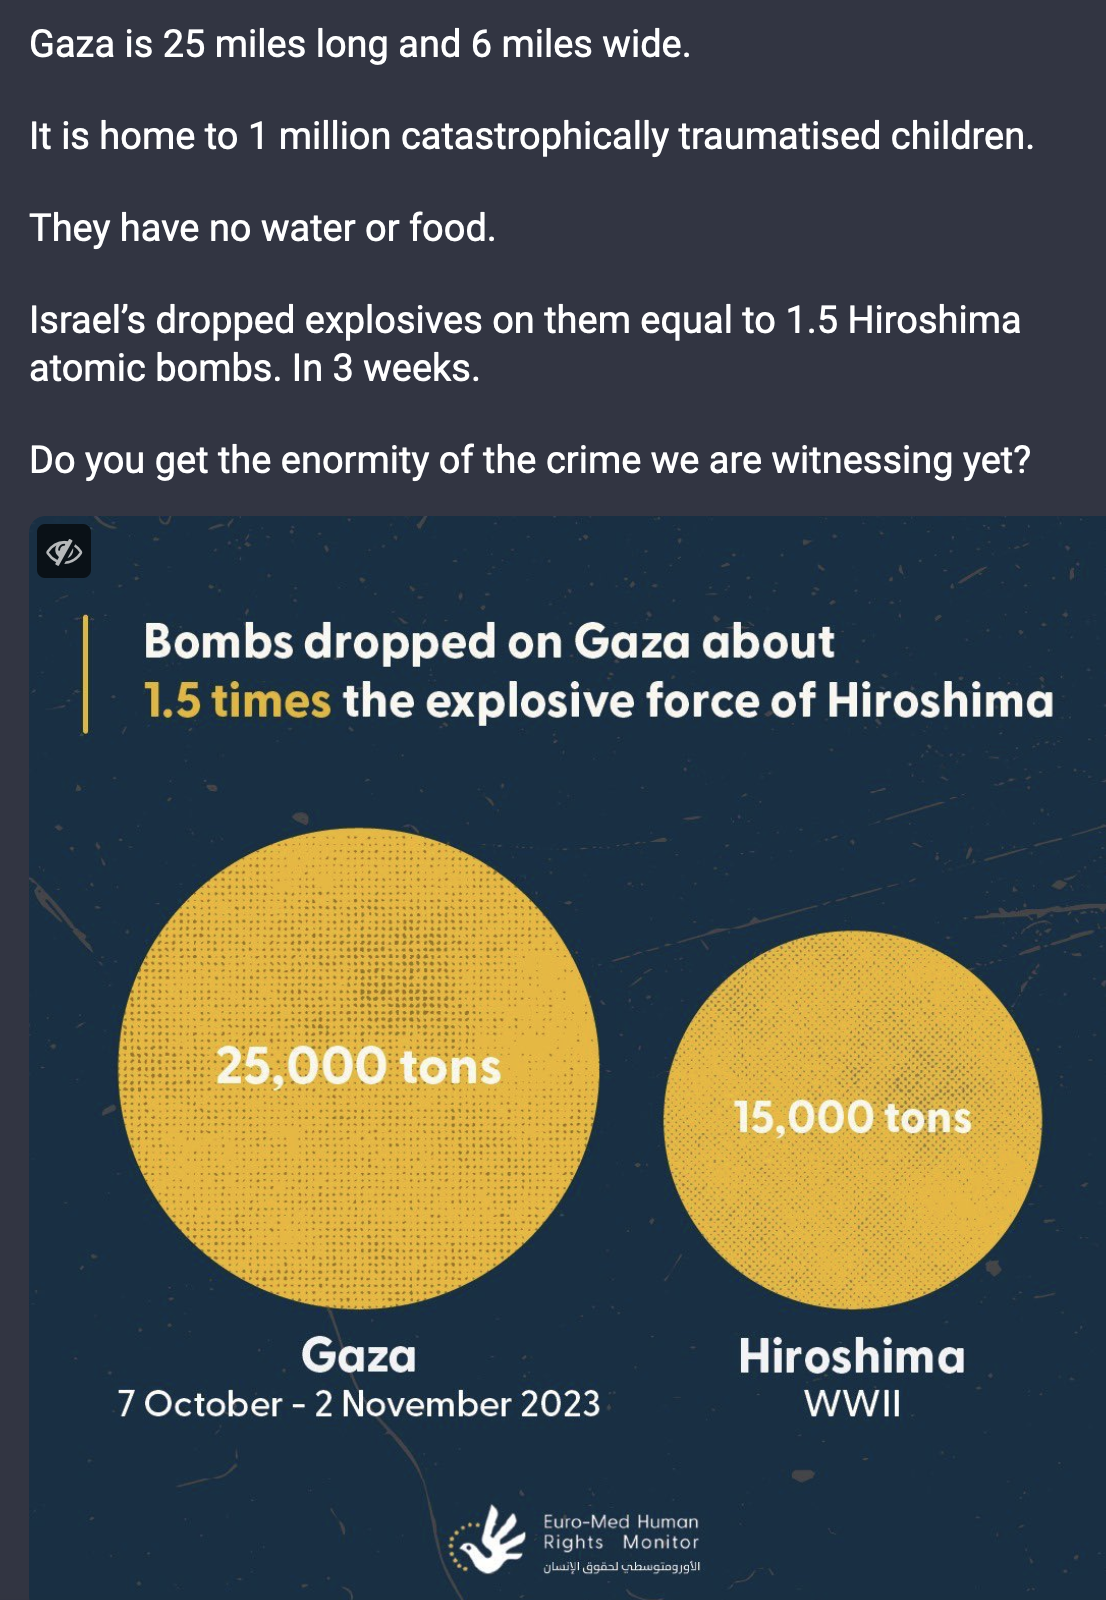 Gaza is 25 miles long and 6 miles wide. It is home to 1 million catastrophically traumatised children. They have no water or food. Israel’s dropped explosives on them equal to 1.5 Hiroshima atomic bombs. In 3 weeks. Do you get the enormity of the crime <br />we are witnessing yet? Bombs dropped on Gaza about 1.5 times the explosive force of Hiroshima Gaza 7 October - 2 November 2023 [large yellow circle with 25,000 tons written at the center in white] Hiroshima WWII [smaller yellow circle with 15,000 tons <br />written at the center in white] Source: Euro-Med Human Rights Monitor